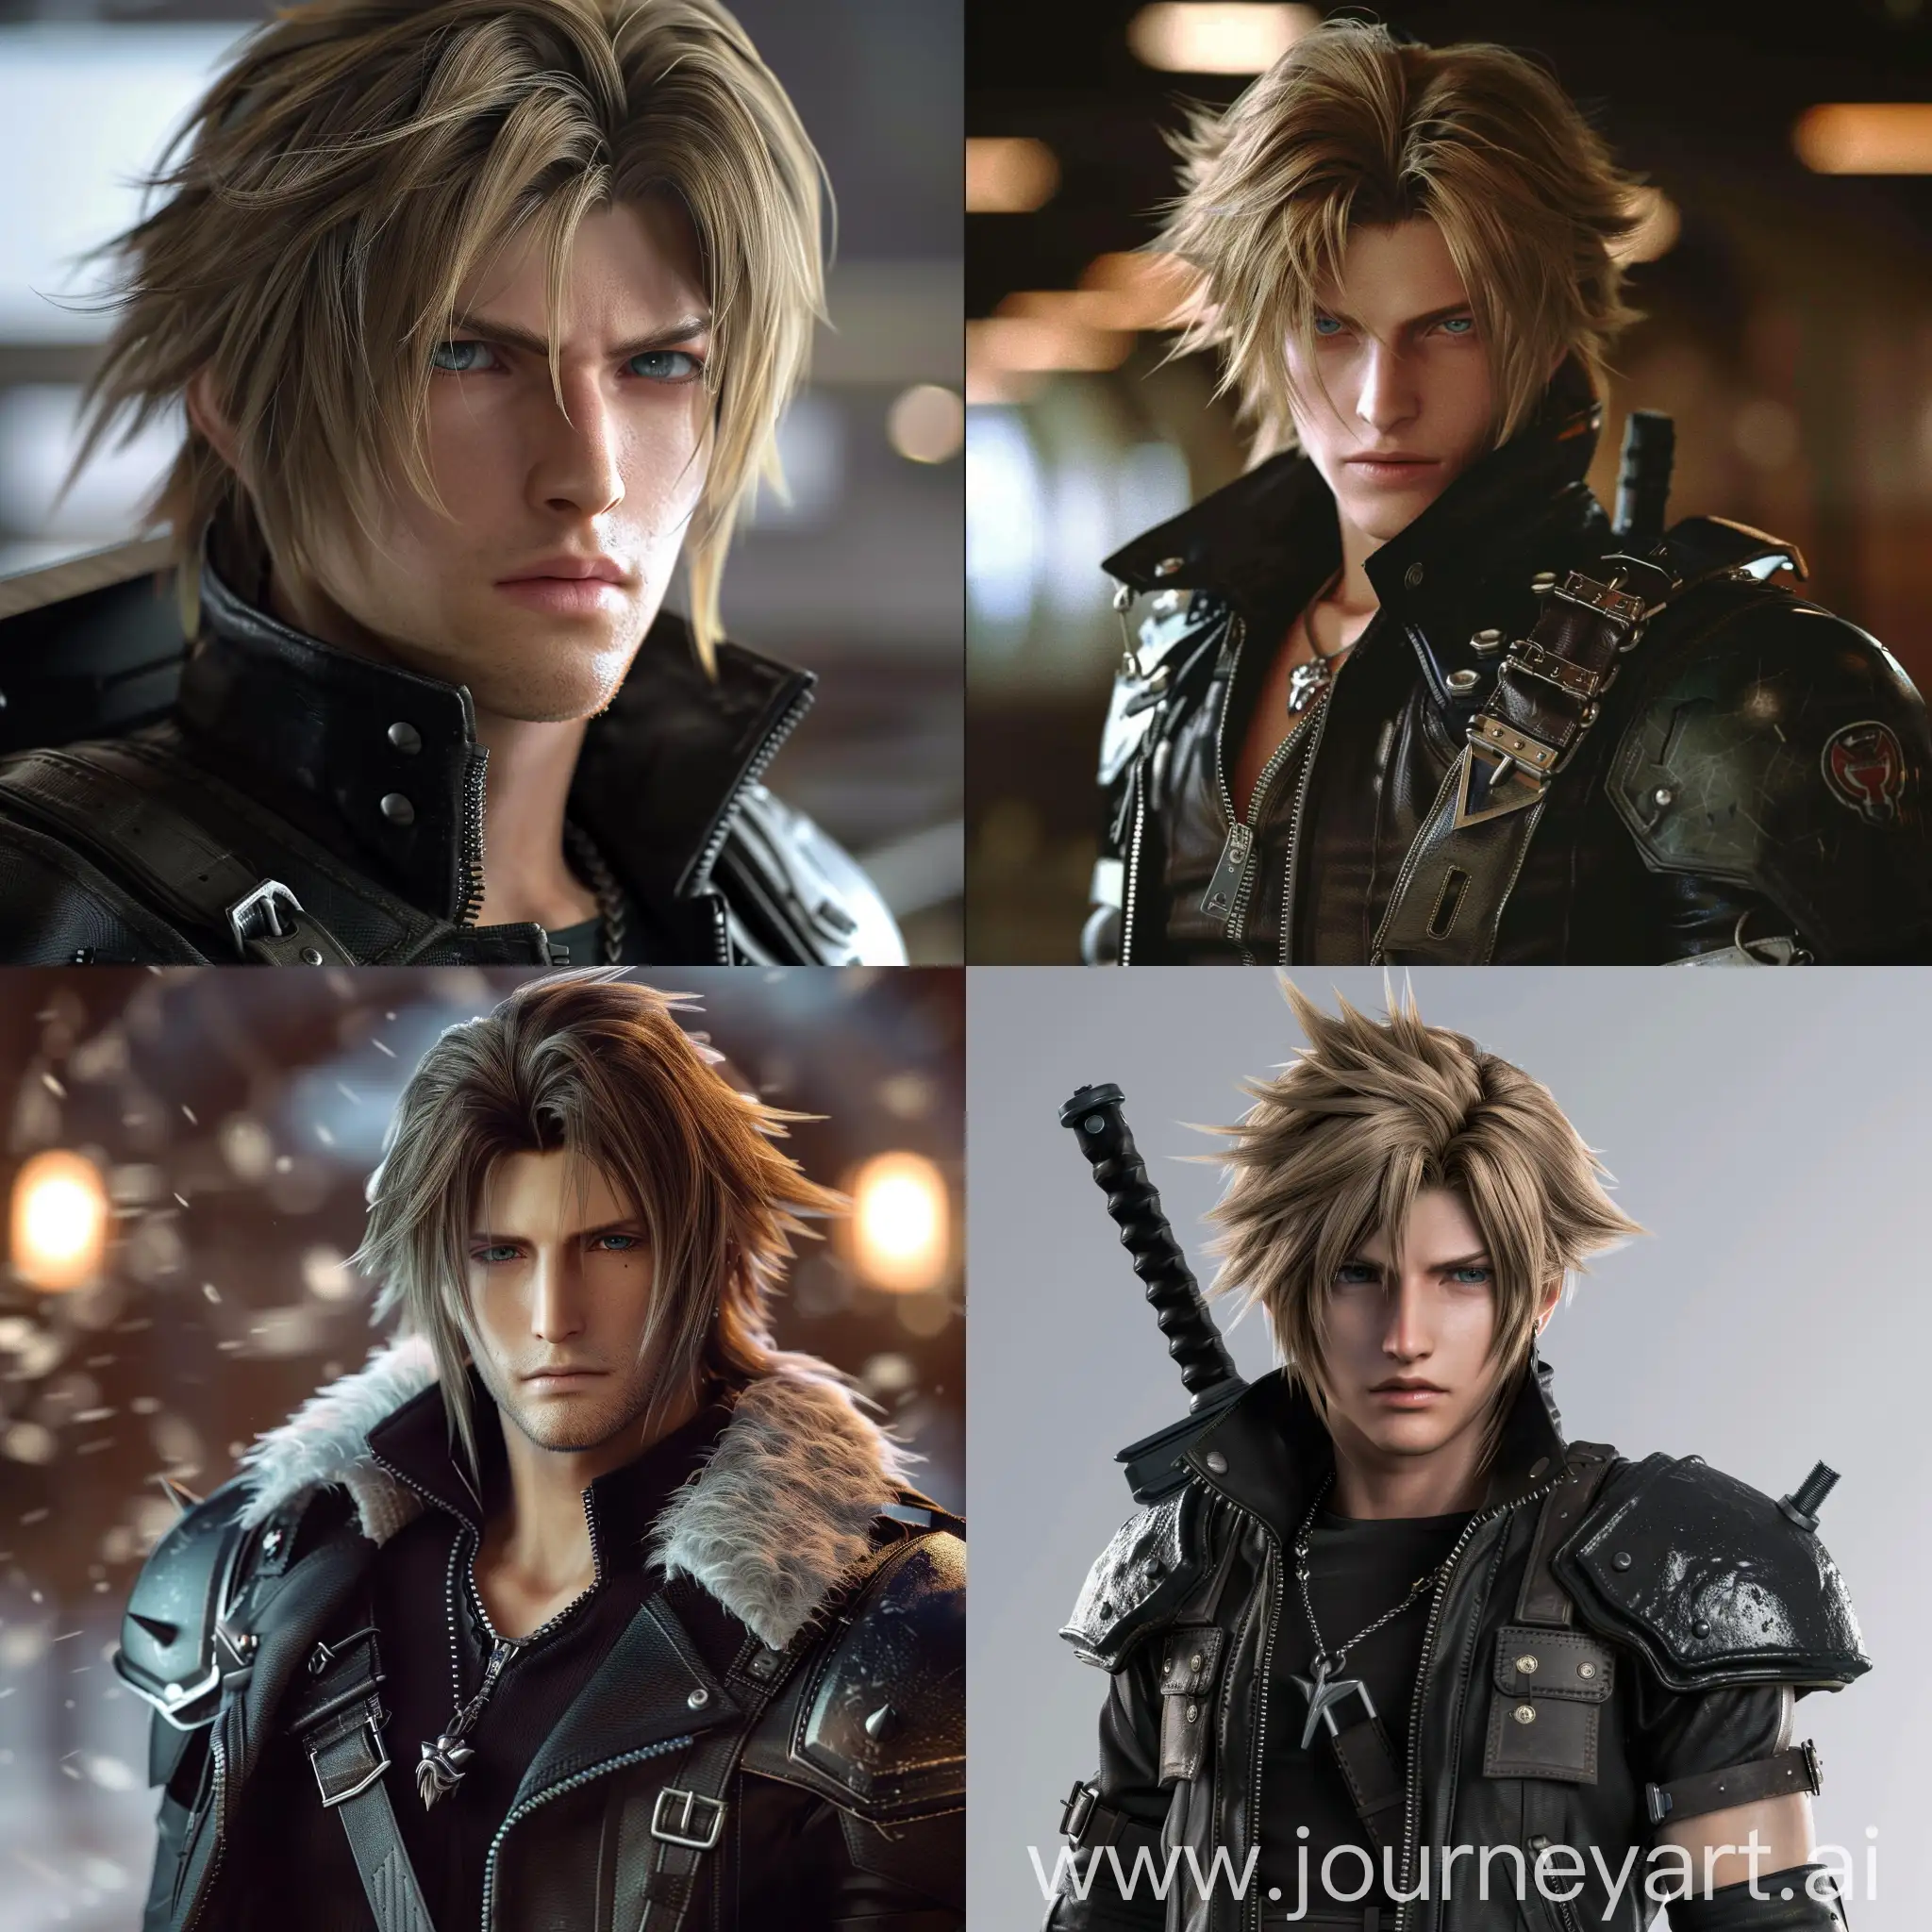 Squall Leonhart as a human